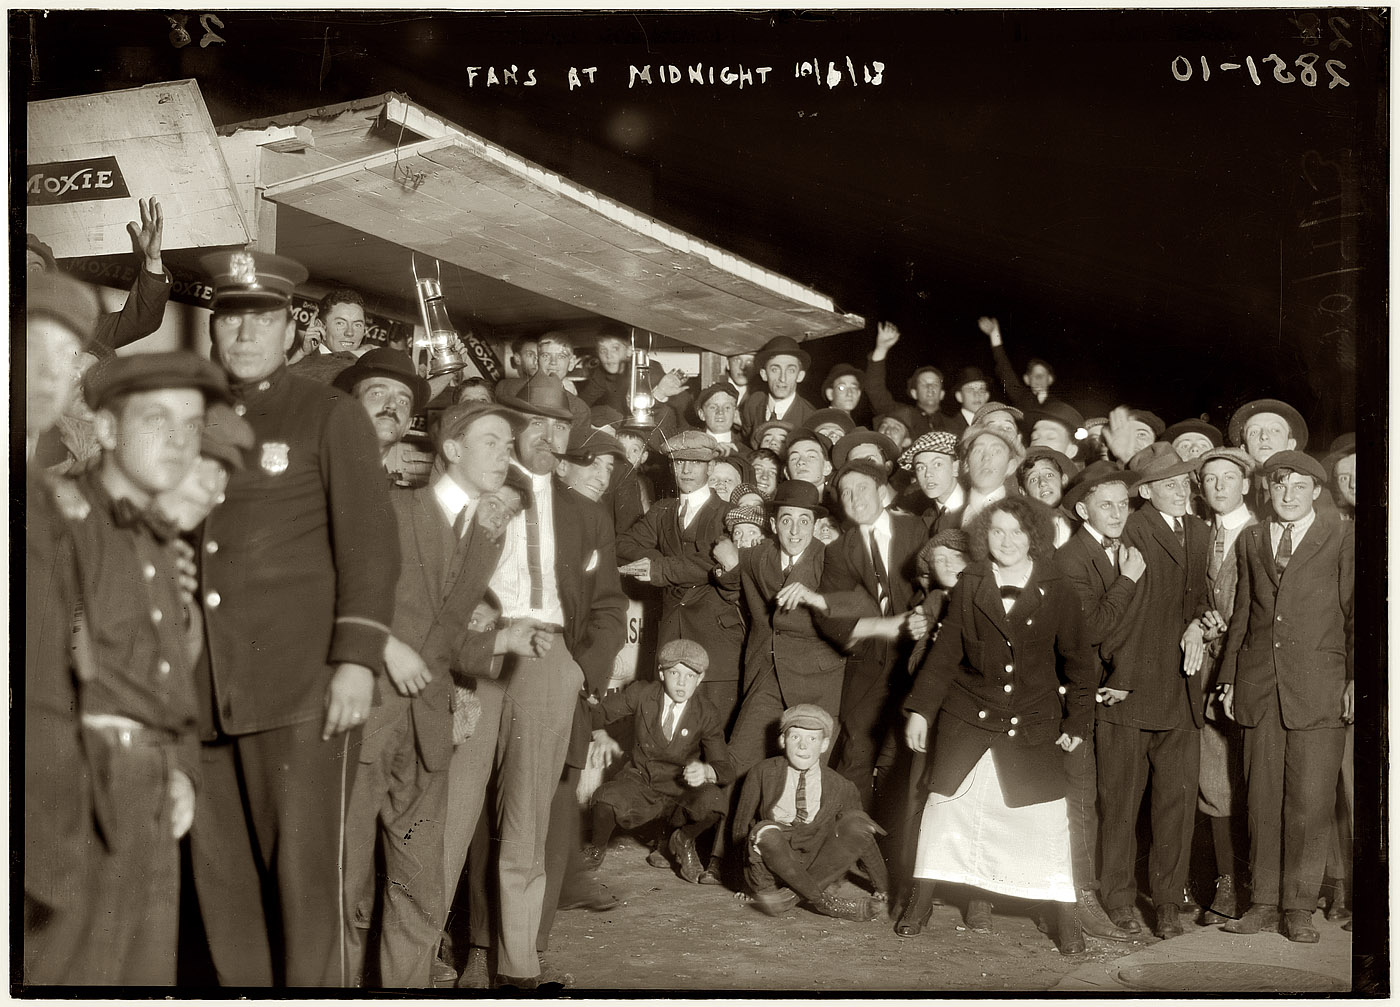 October 6, 1913. "Fans at Midnight." The crowd at a Moxie stand outside New York's Polo Grounds before the first game of the 1913 World Series between the Giants and Philadelphia Athletics the following afternoon. View full size.